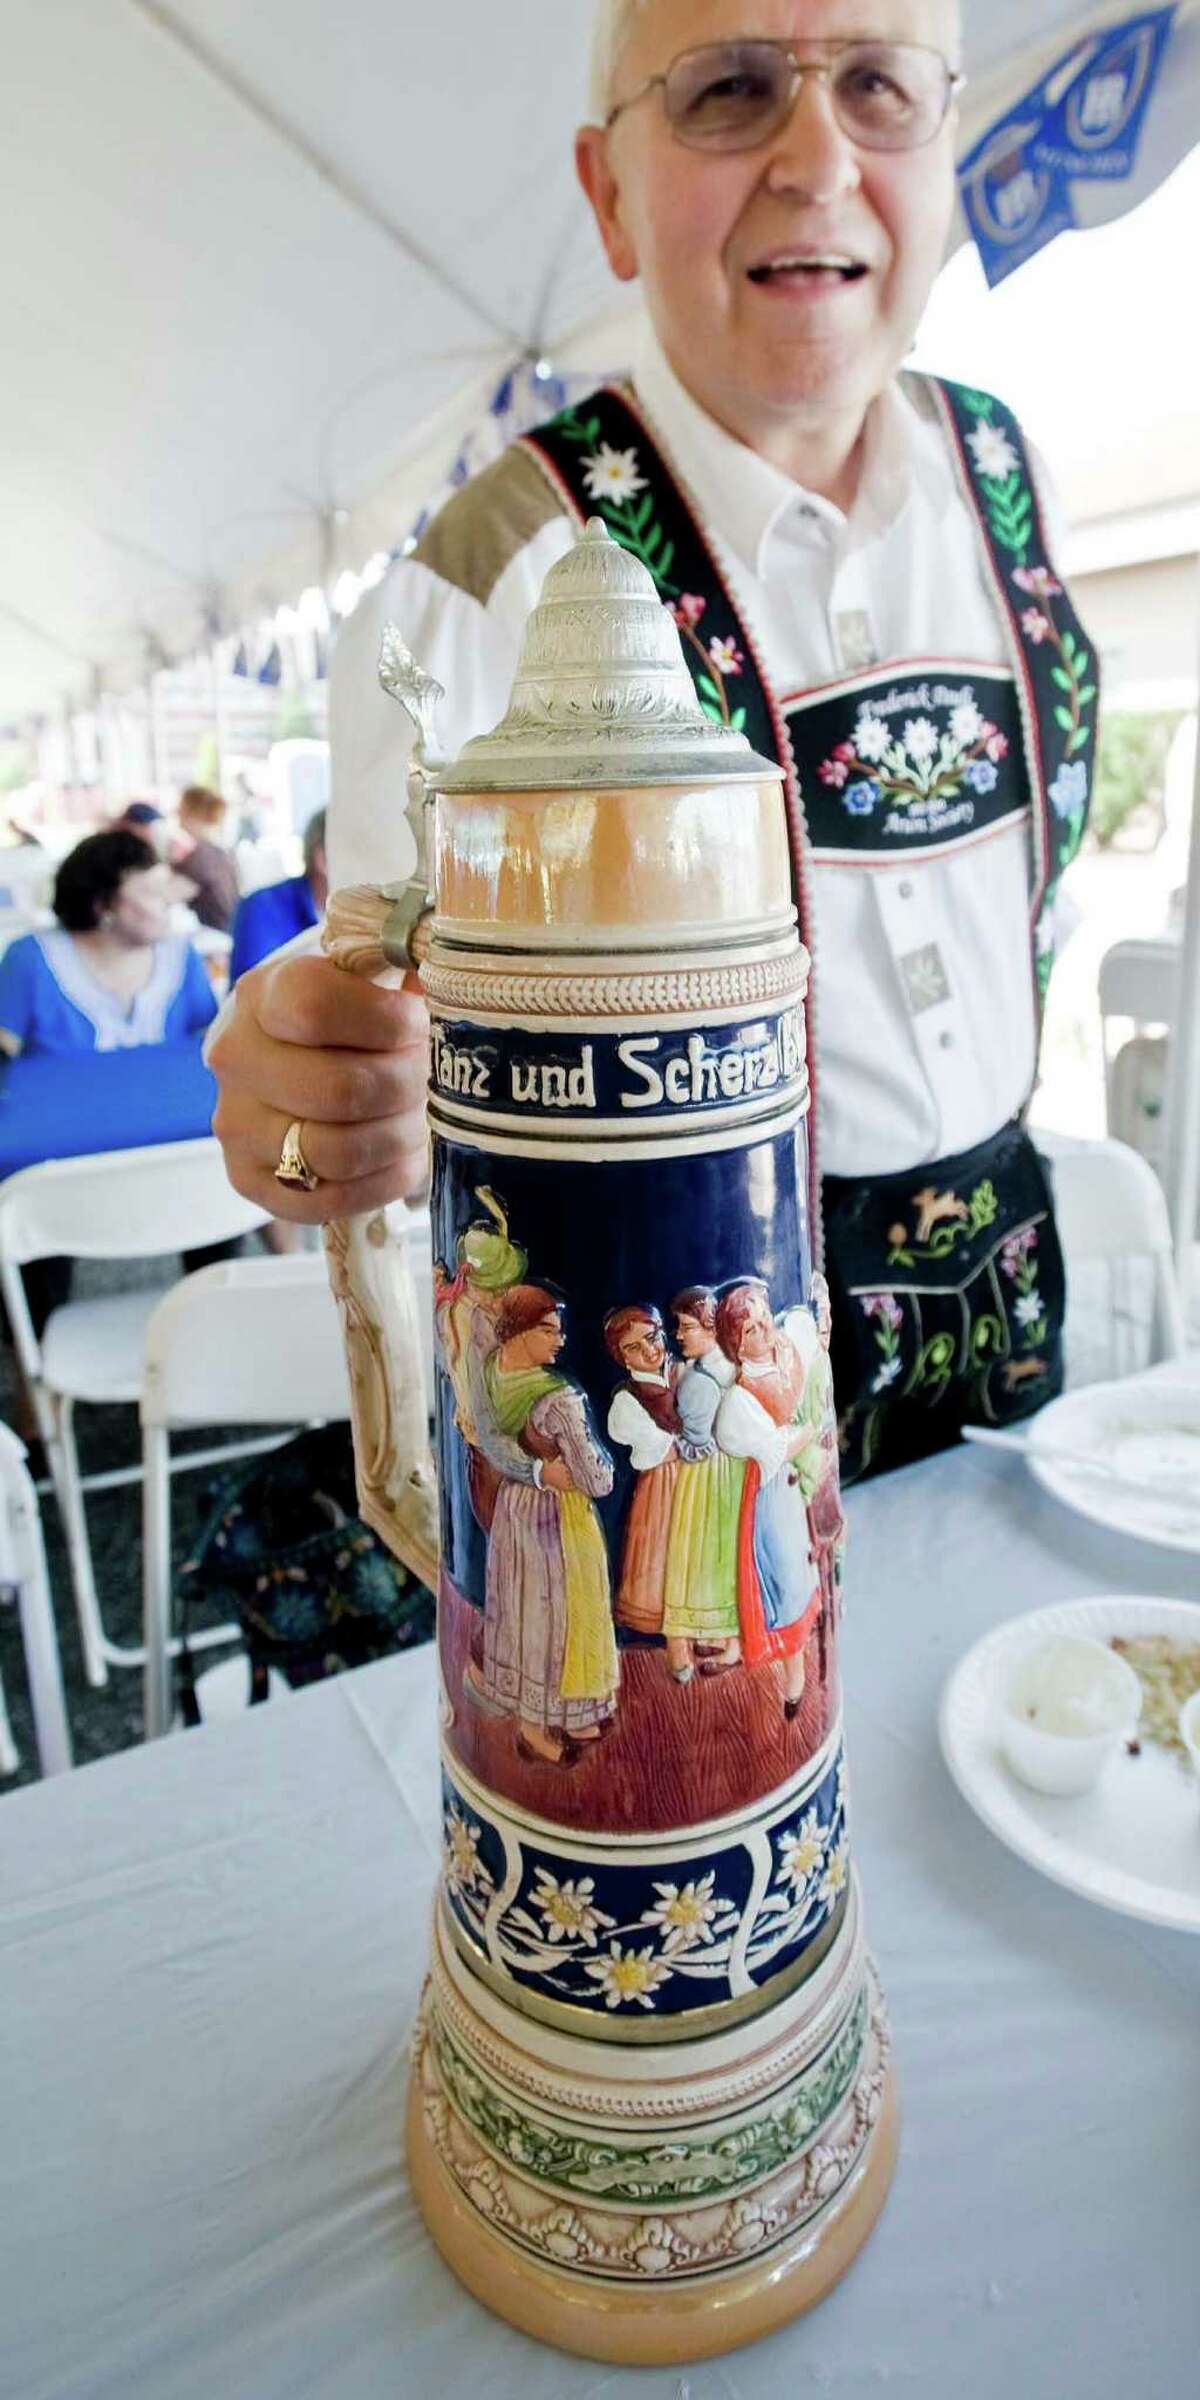 Frederick Pauli, a member of the Arion Singing Society, brought a 1960s beer stein, one of 200 in his collection, to Oktoberfest.